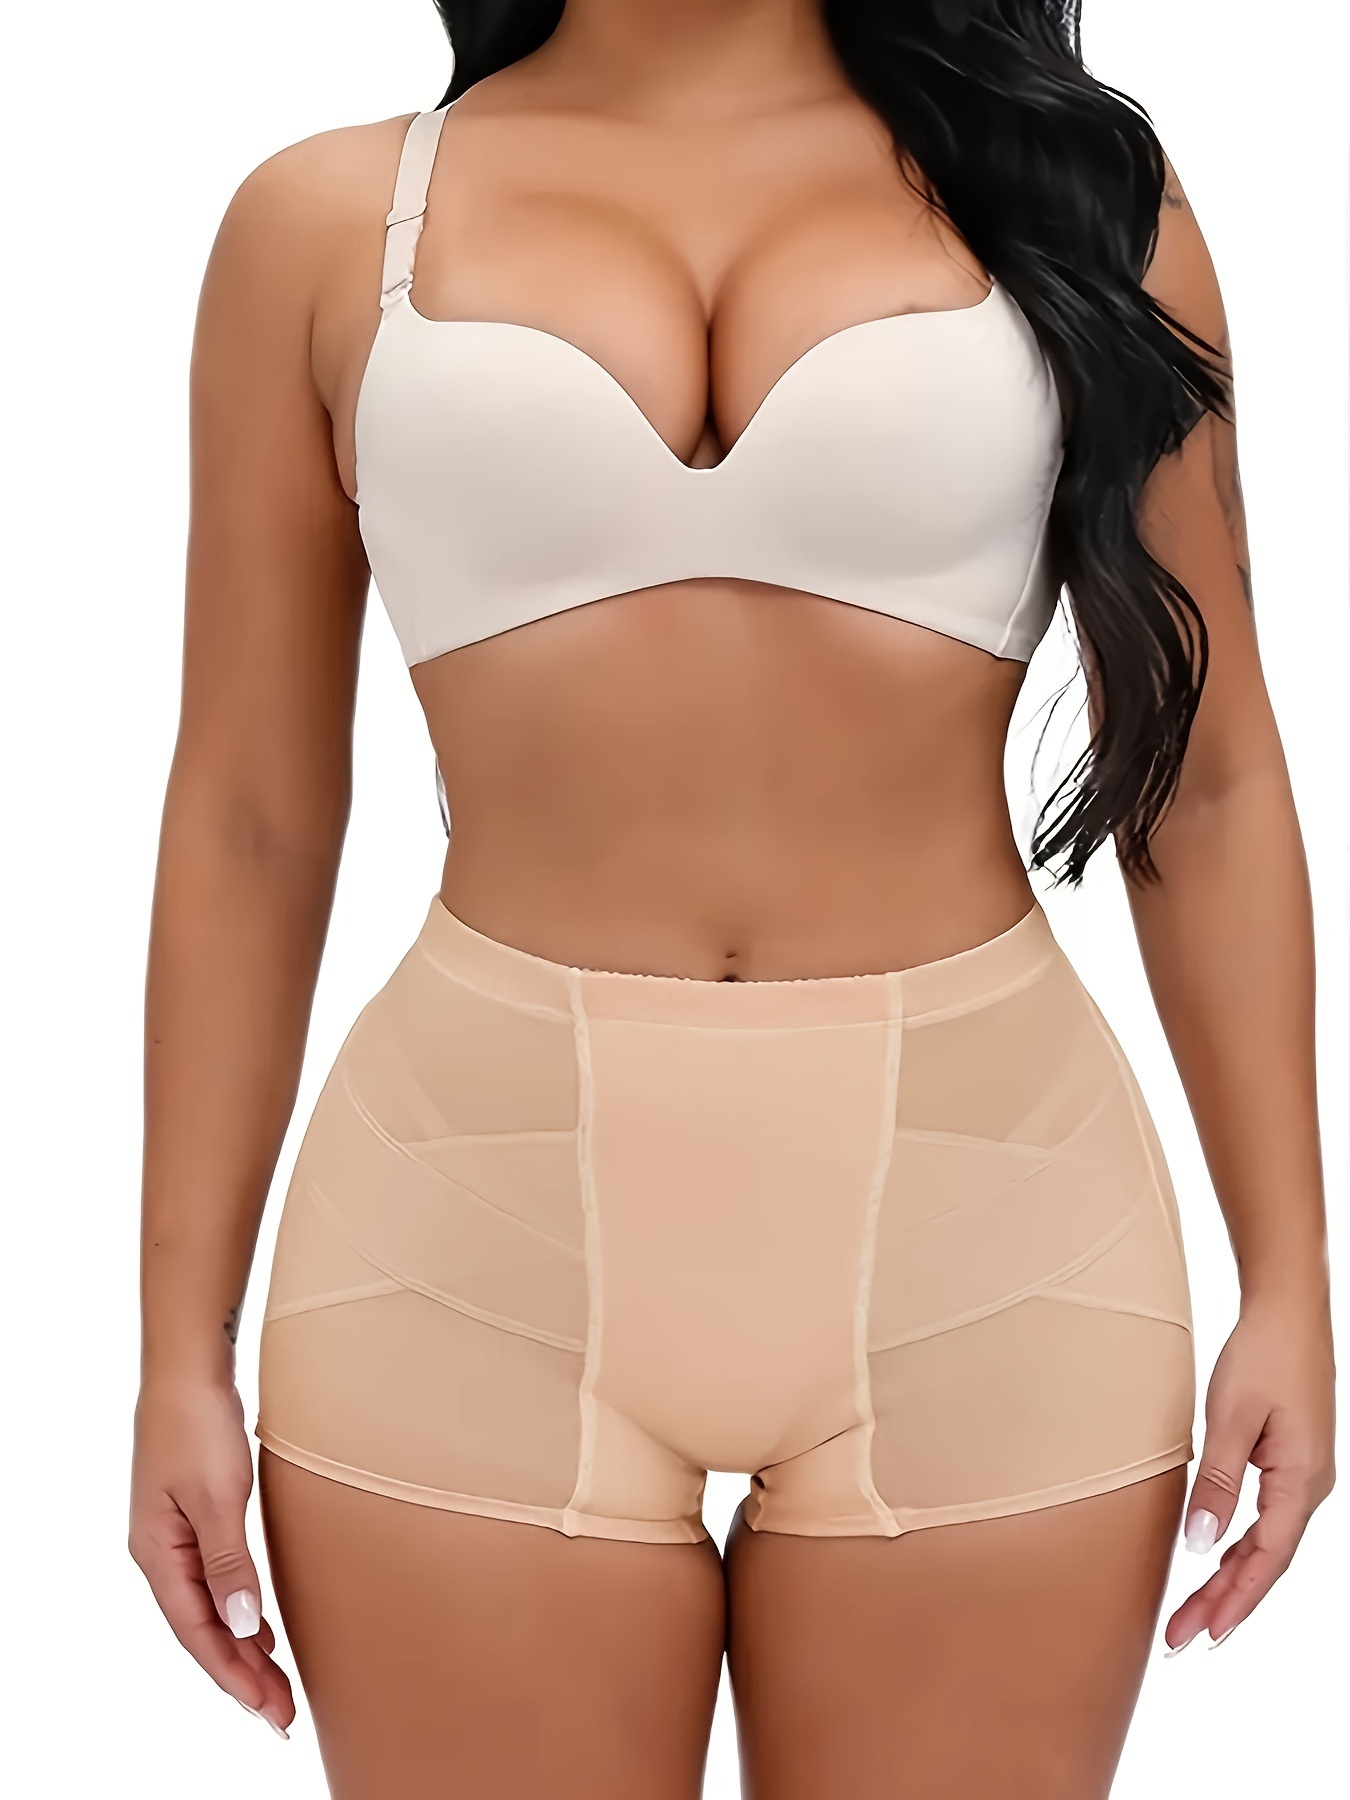  Women Butt Lifter Shapewear - Body Shapers Ladies Butt Lift  Panties Tunny Control Padded Fake Ass Underwear Female Breathable  Shapewear,Apricot,S